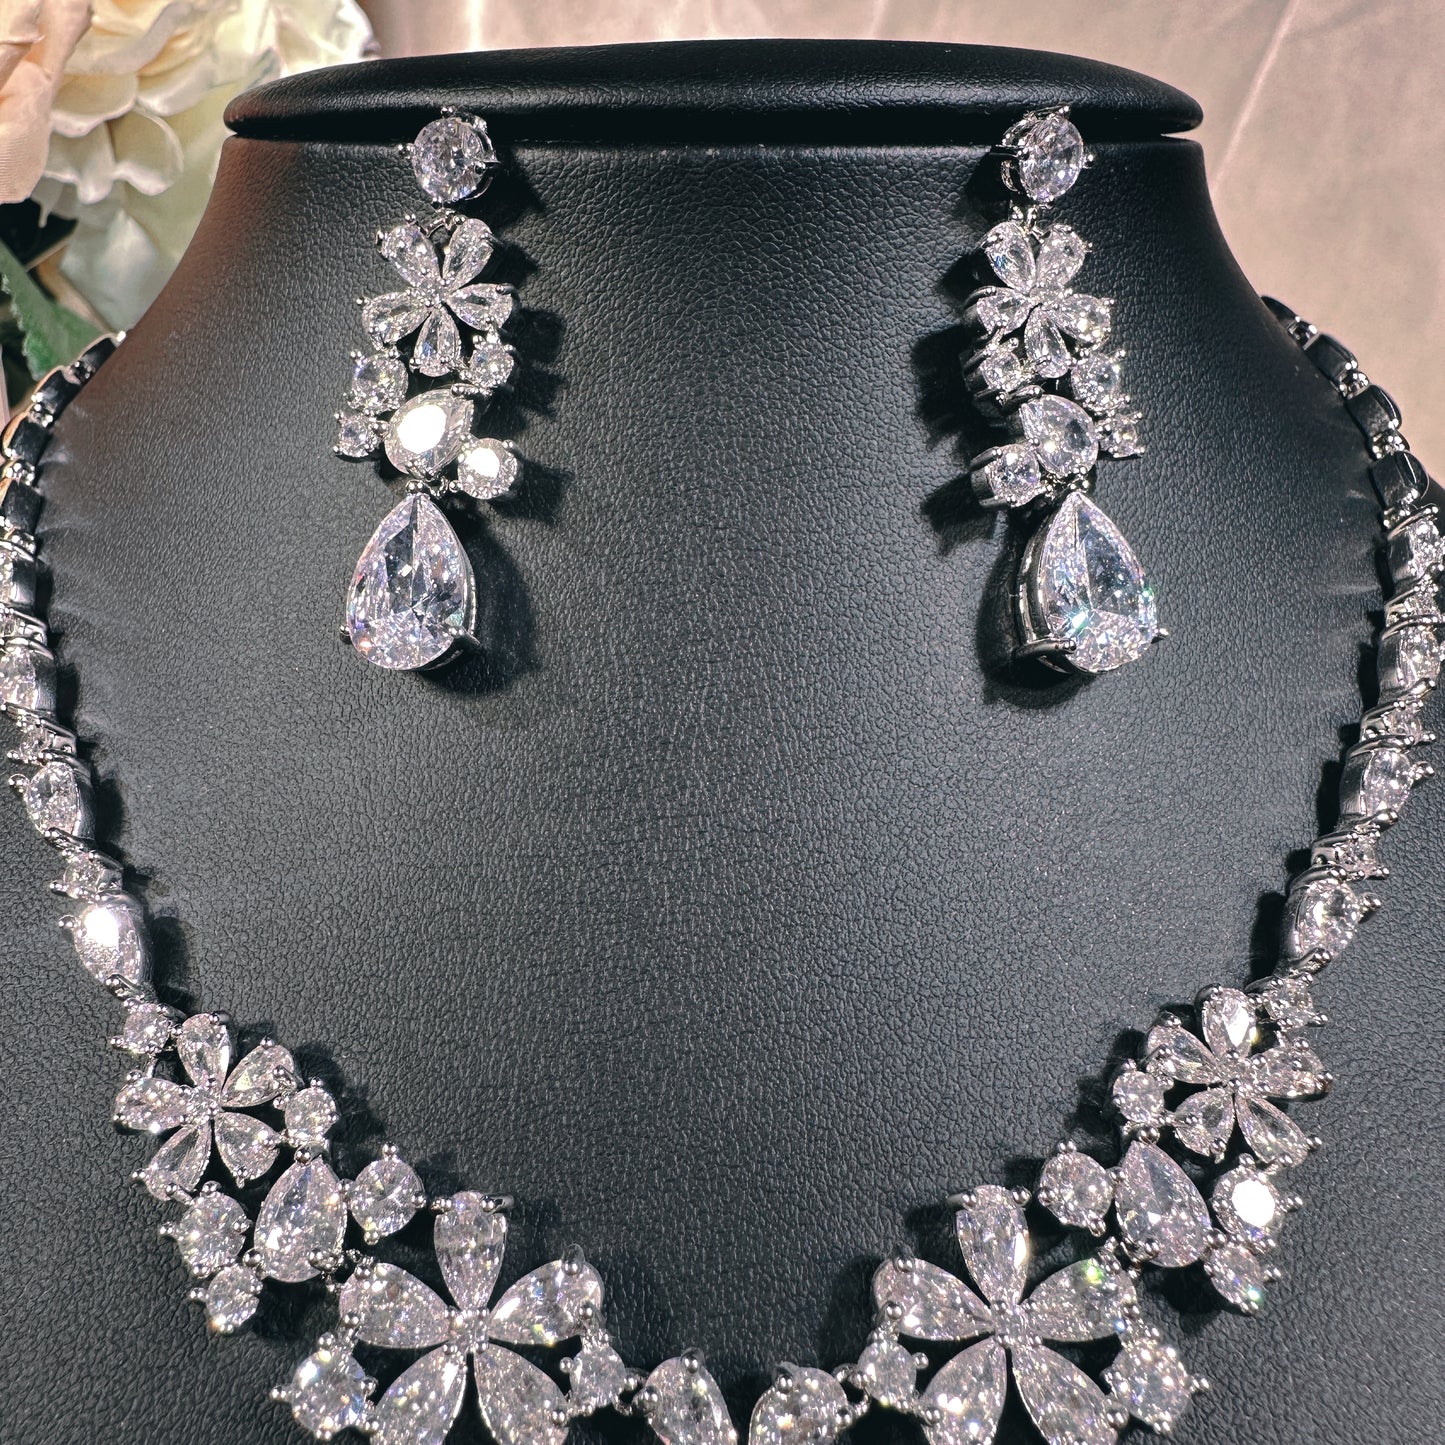 #23902006 Elegant and Glamorous Bib Style Jewelry Set - Available in 3 Stunning Colors (Silver, Green, & Blue)